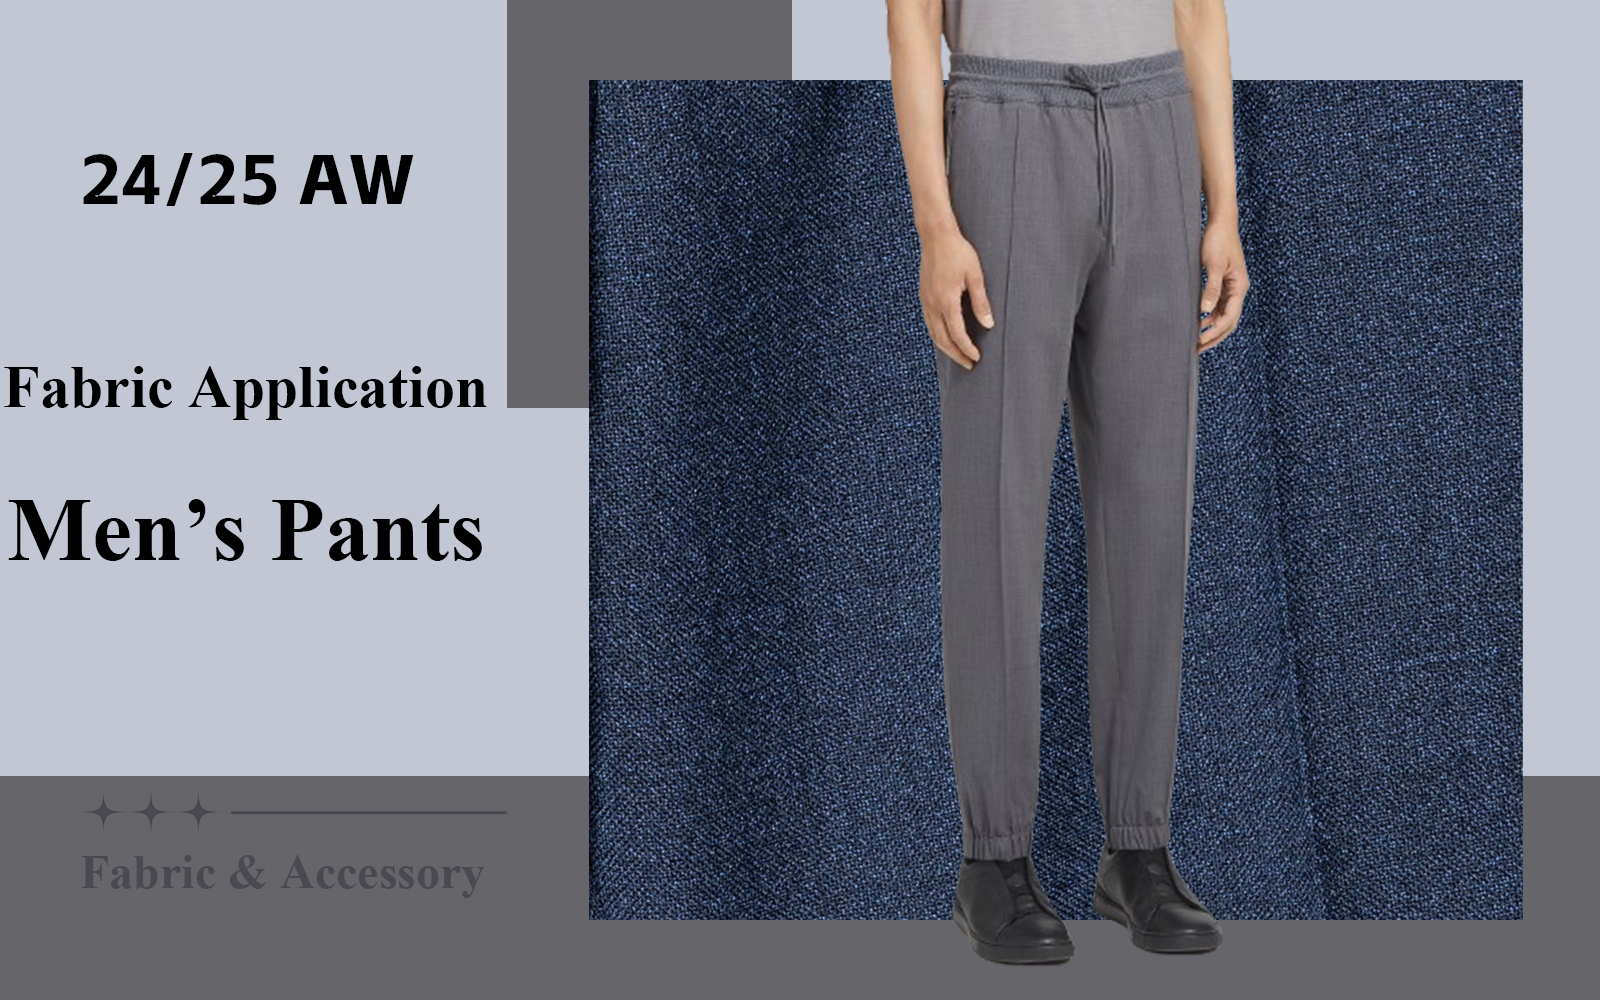 Business Leisure -- The Fabric Trend for Men's Pants